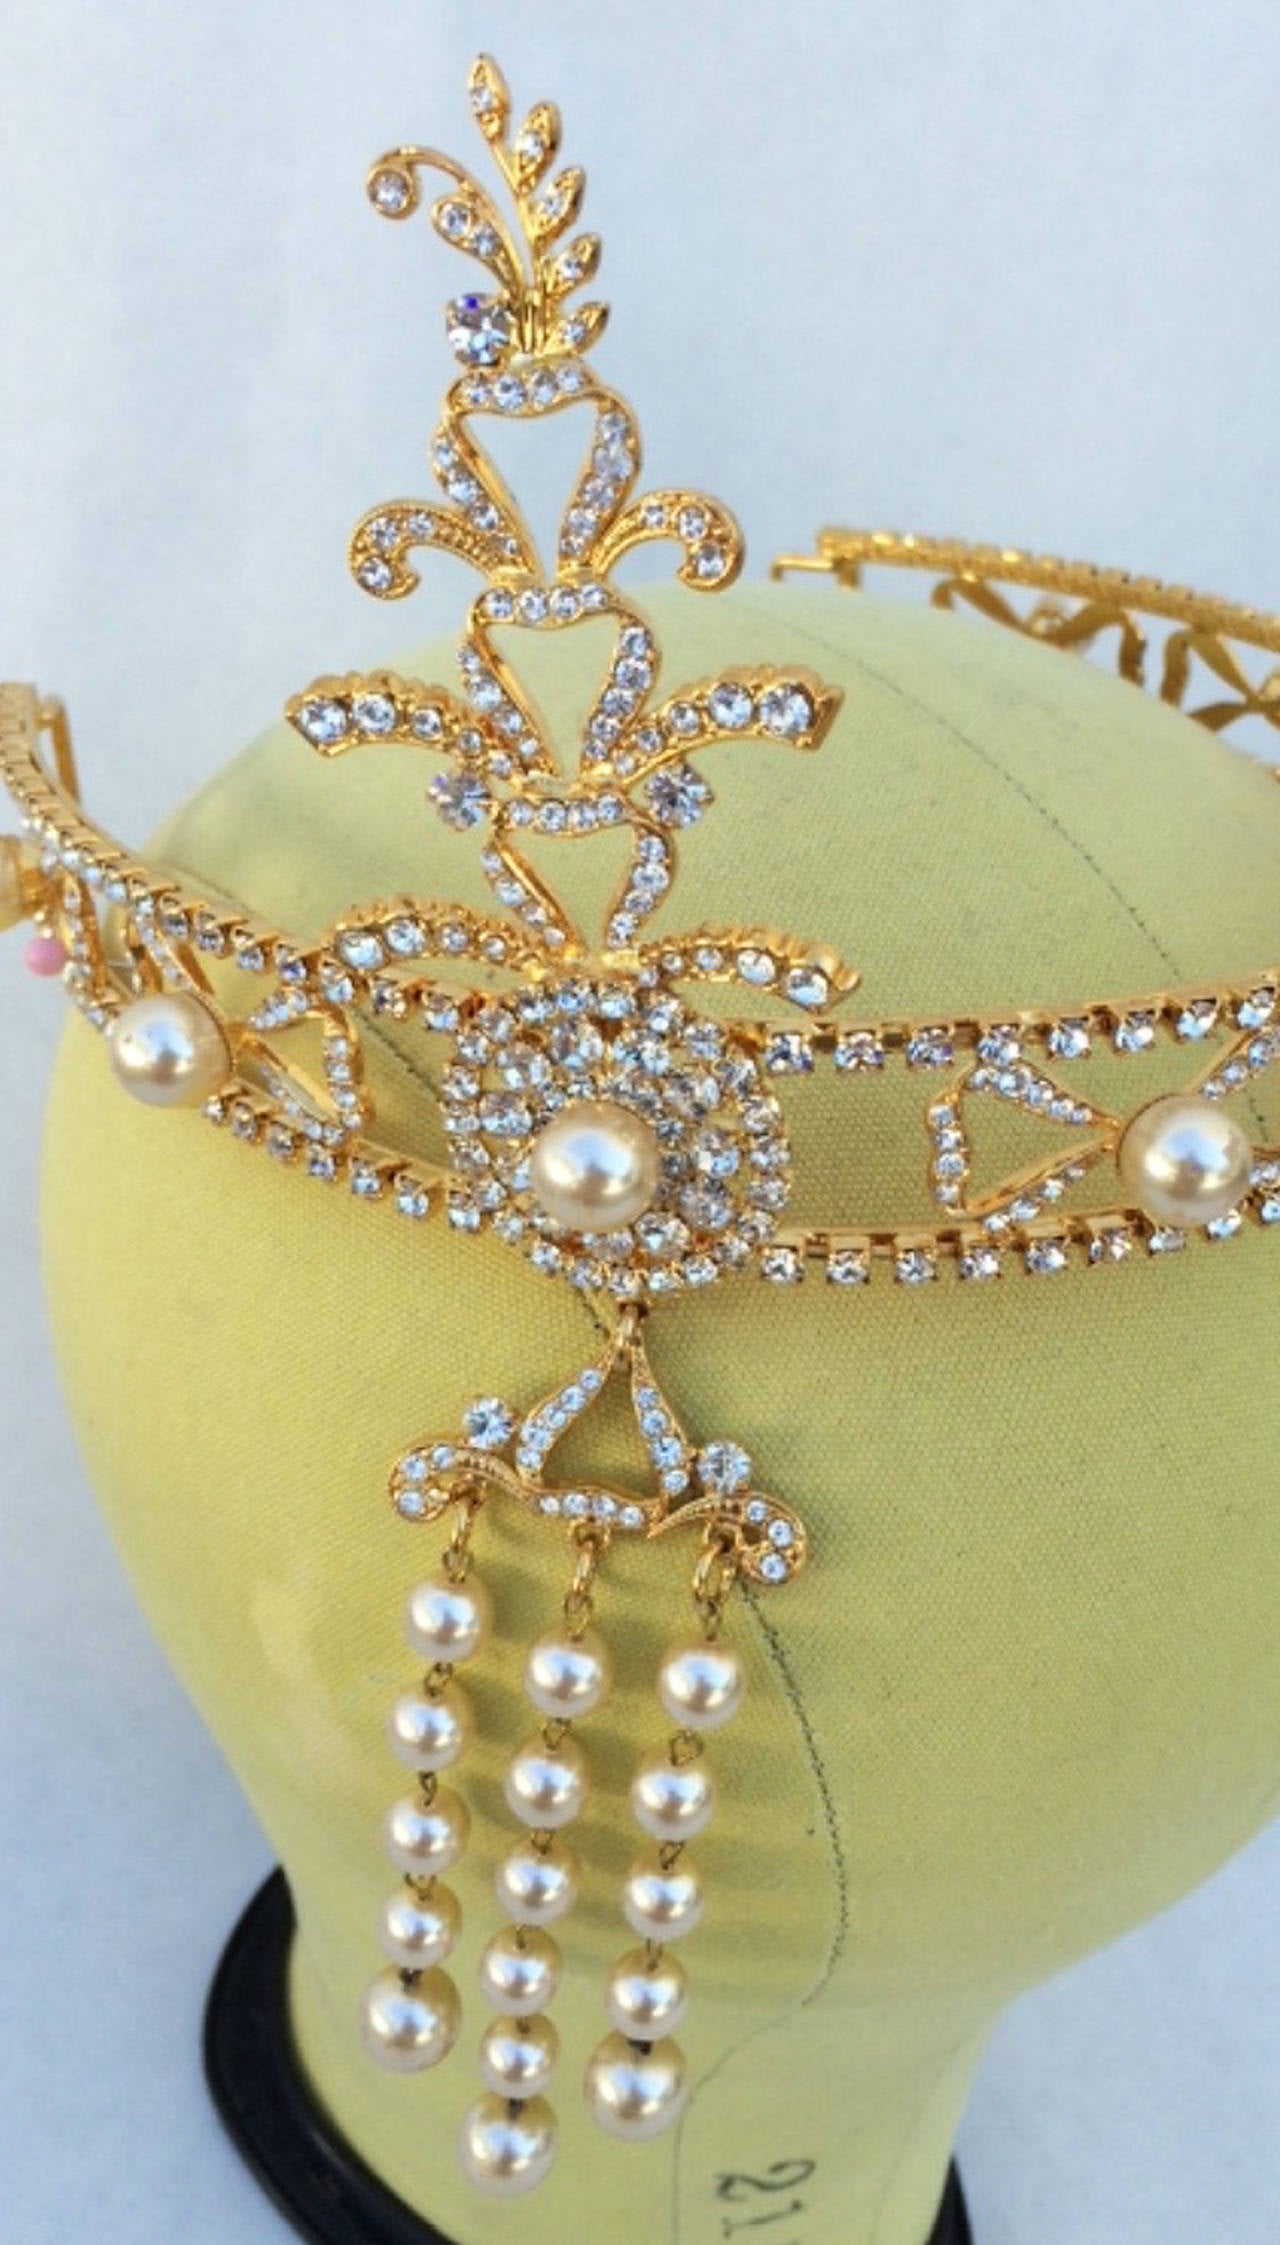 A fine and rare vintage diadem headband. Engraved gilt metal item features prong set crystals and faux pearl centers and pendant. Excellent.